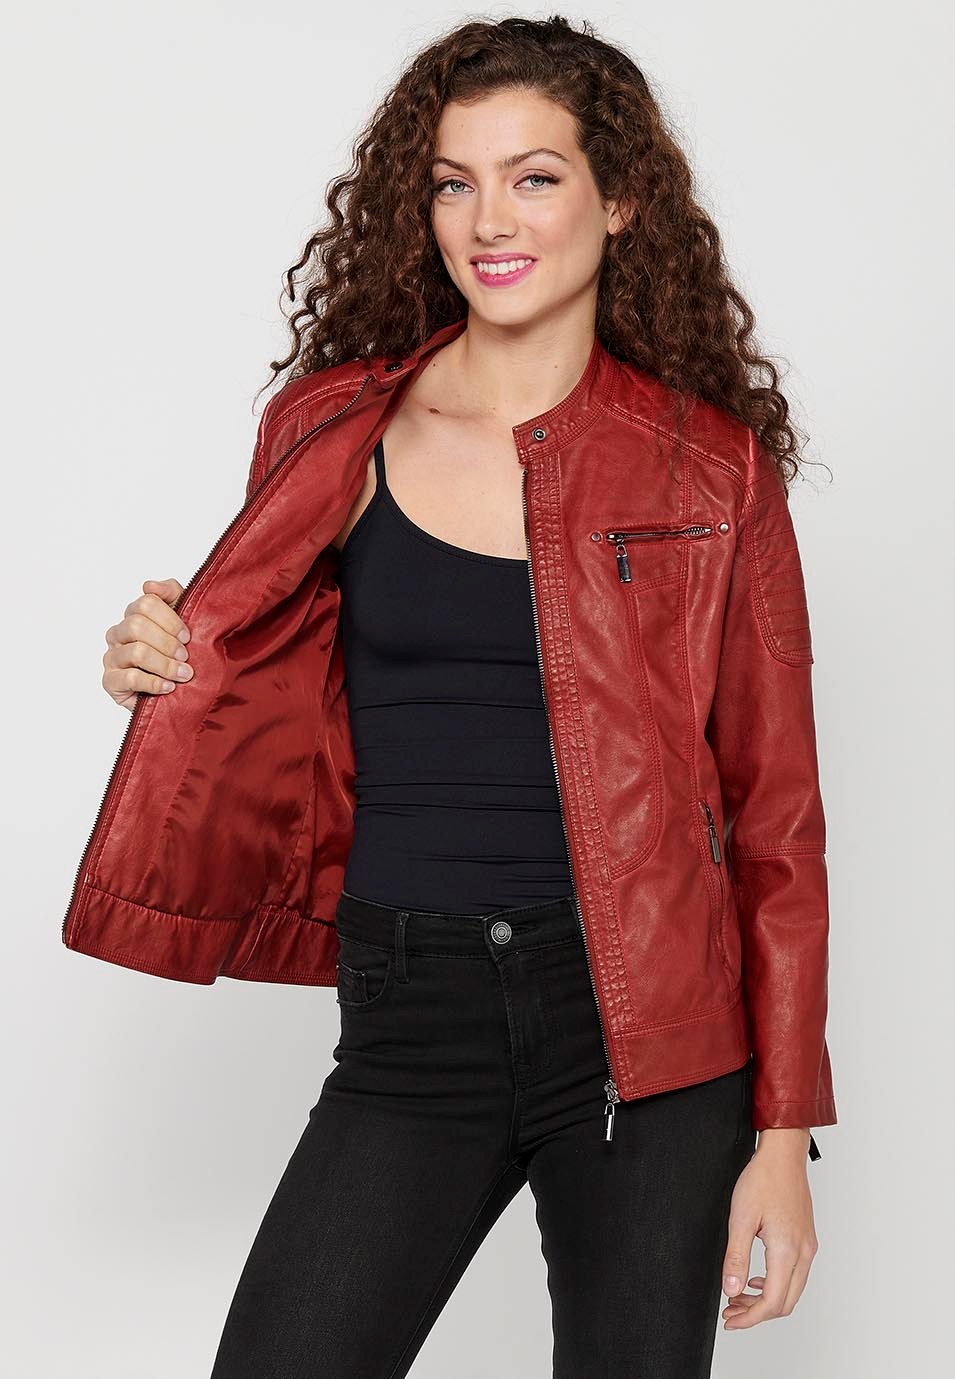 Women's Red Long Sleeve Round Neck Zipper Front Closure Jacket 8